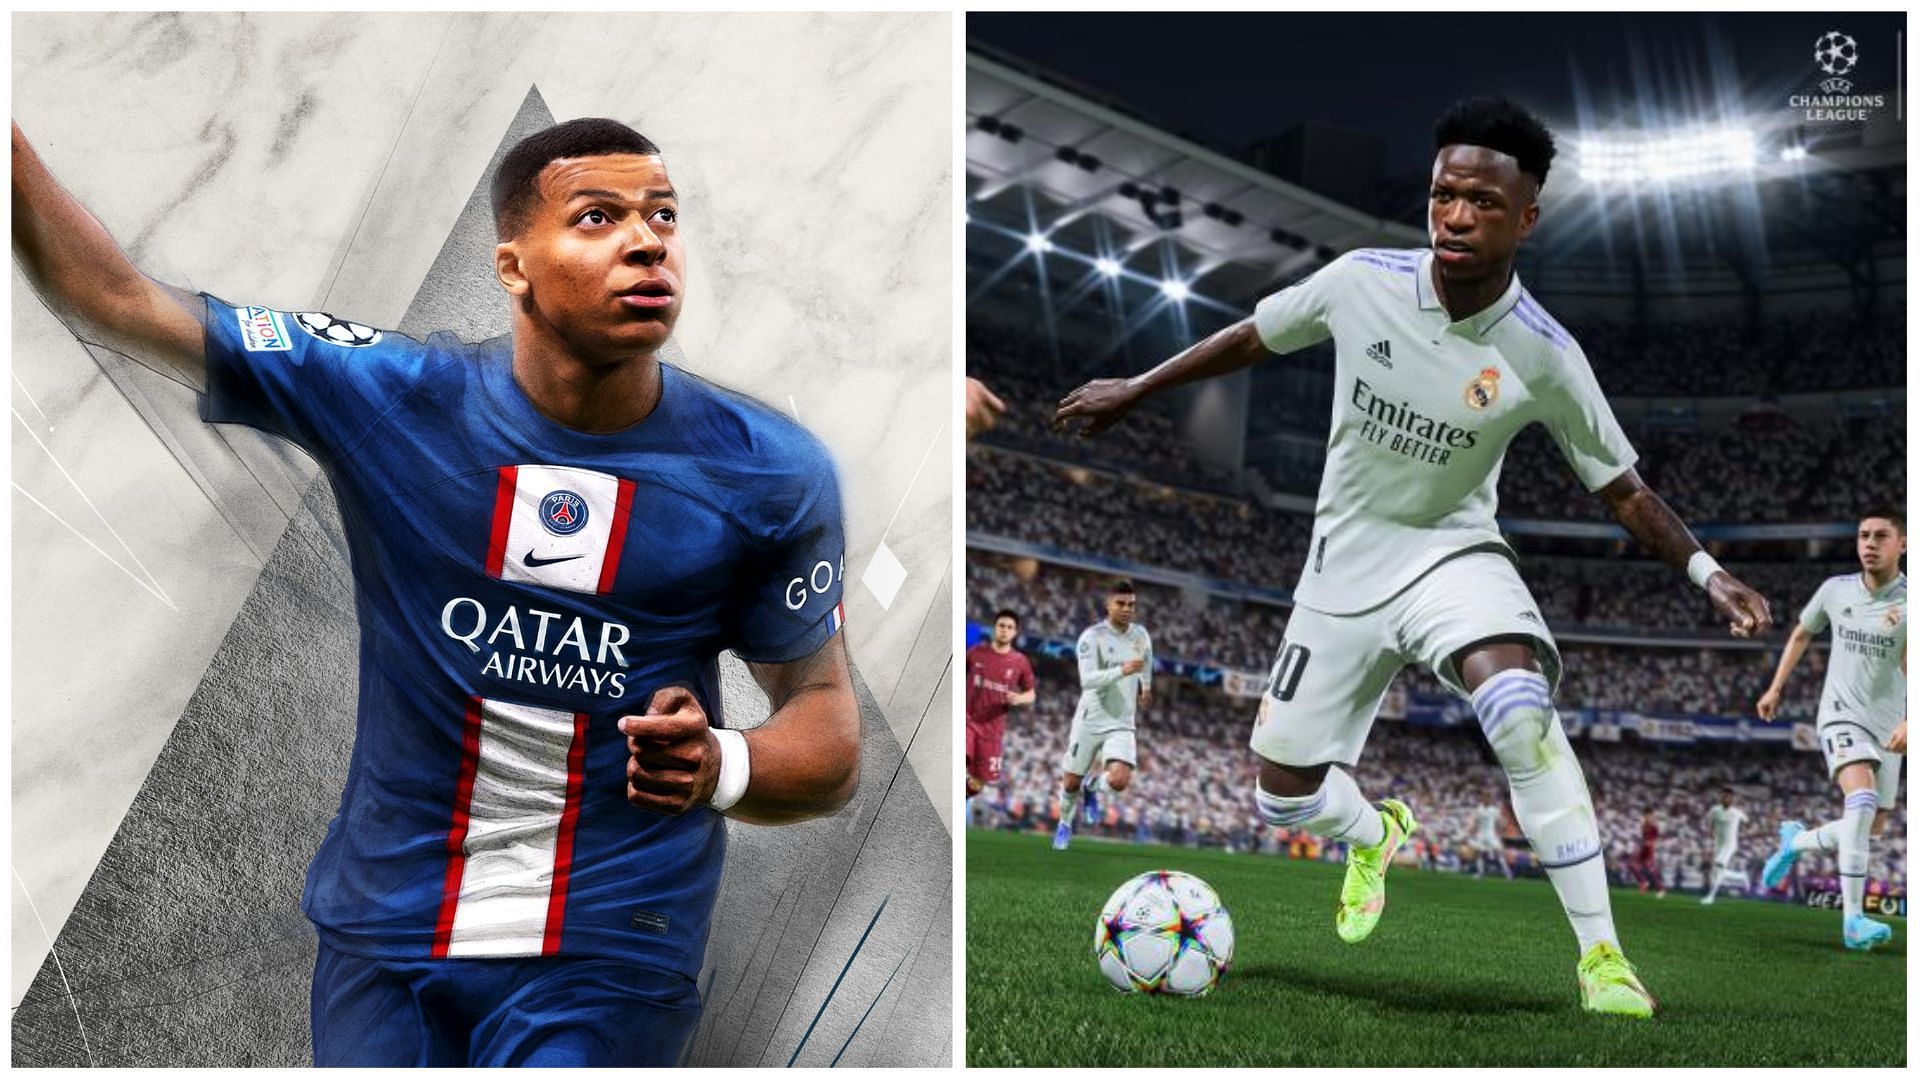 Title Update 6 will soon be live in FIFA 23 (Images via EA Sports)